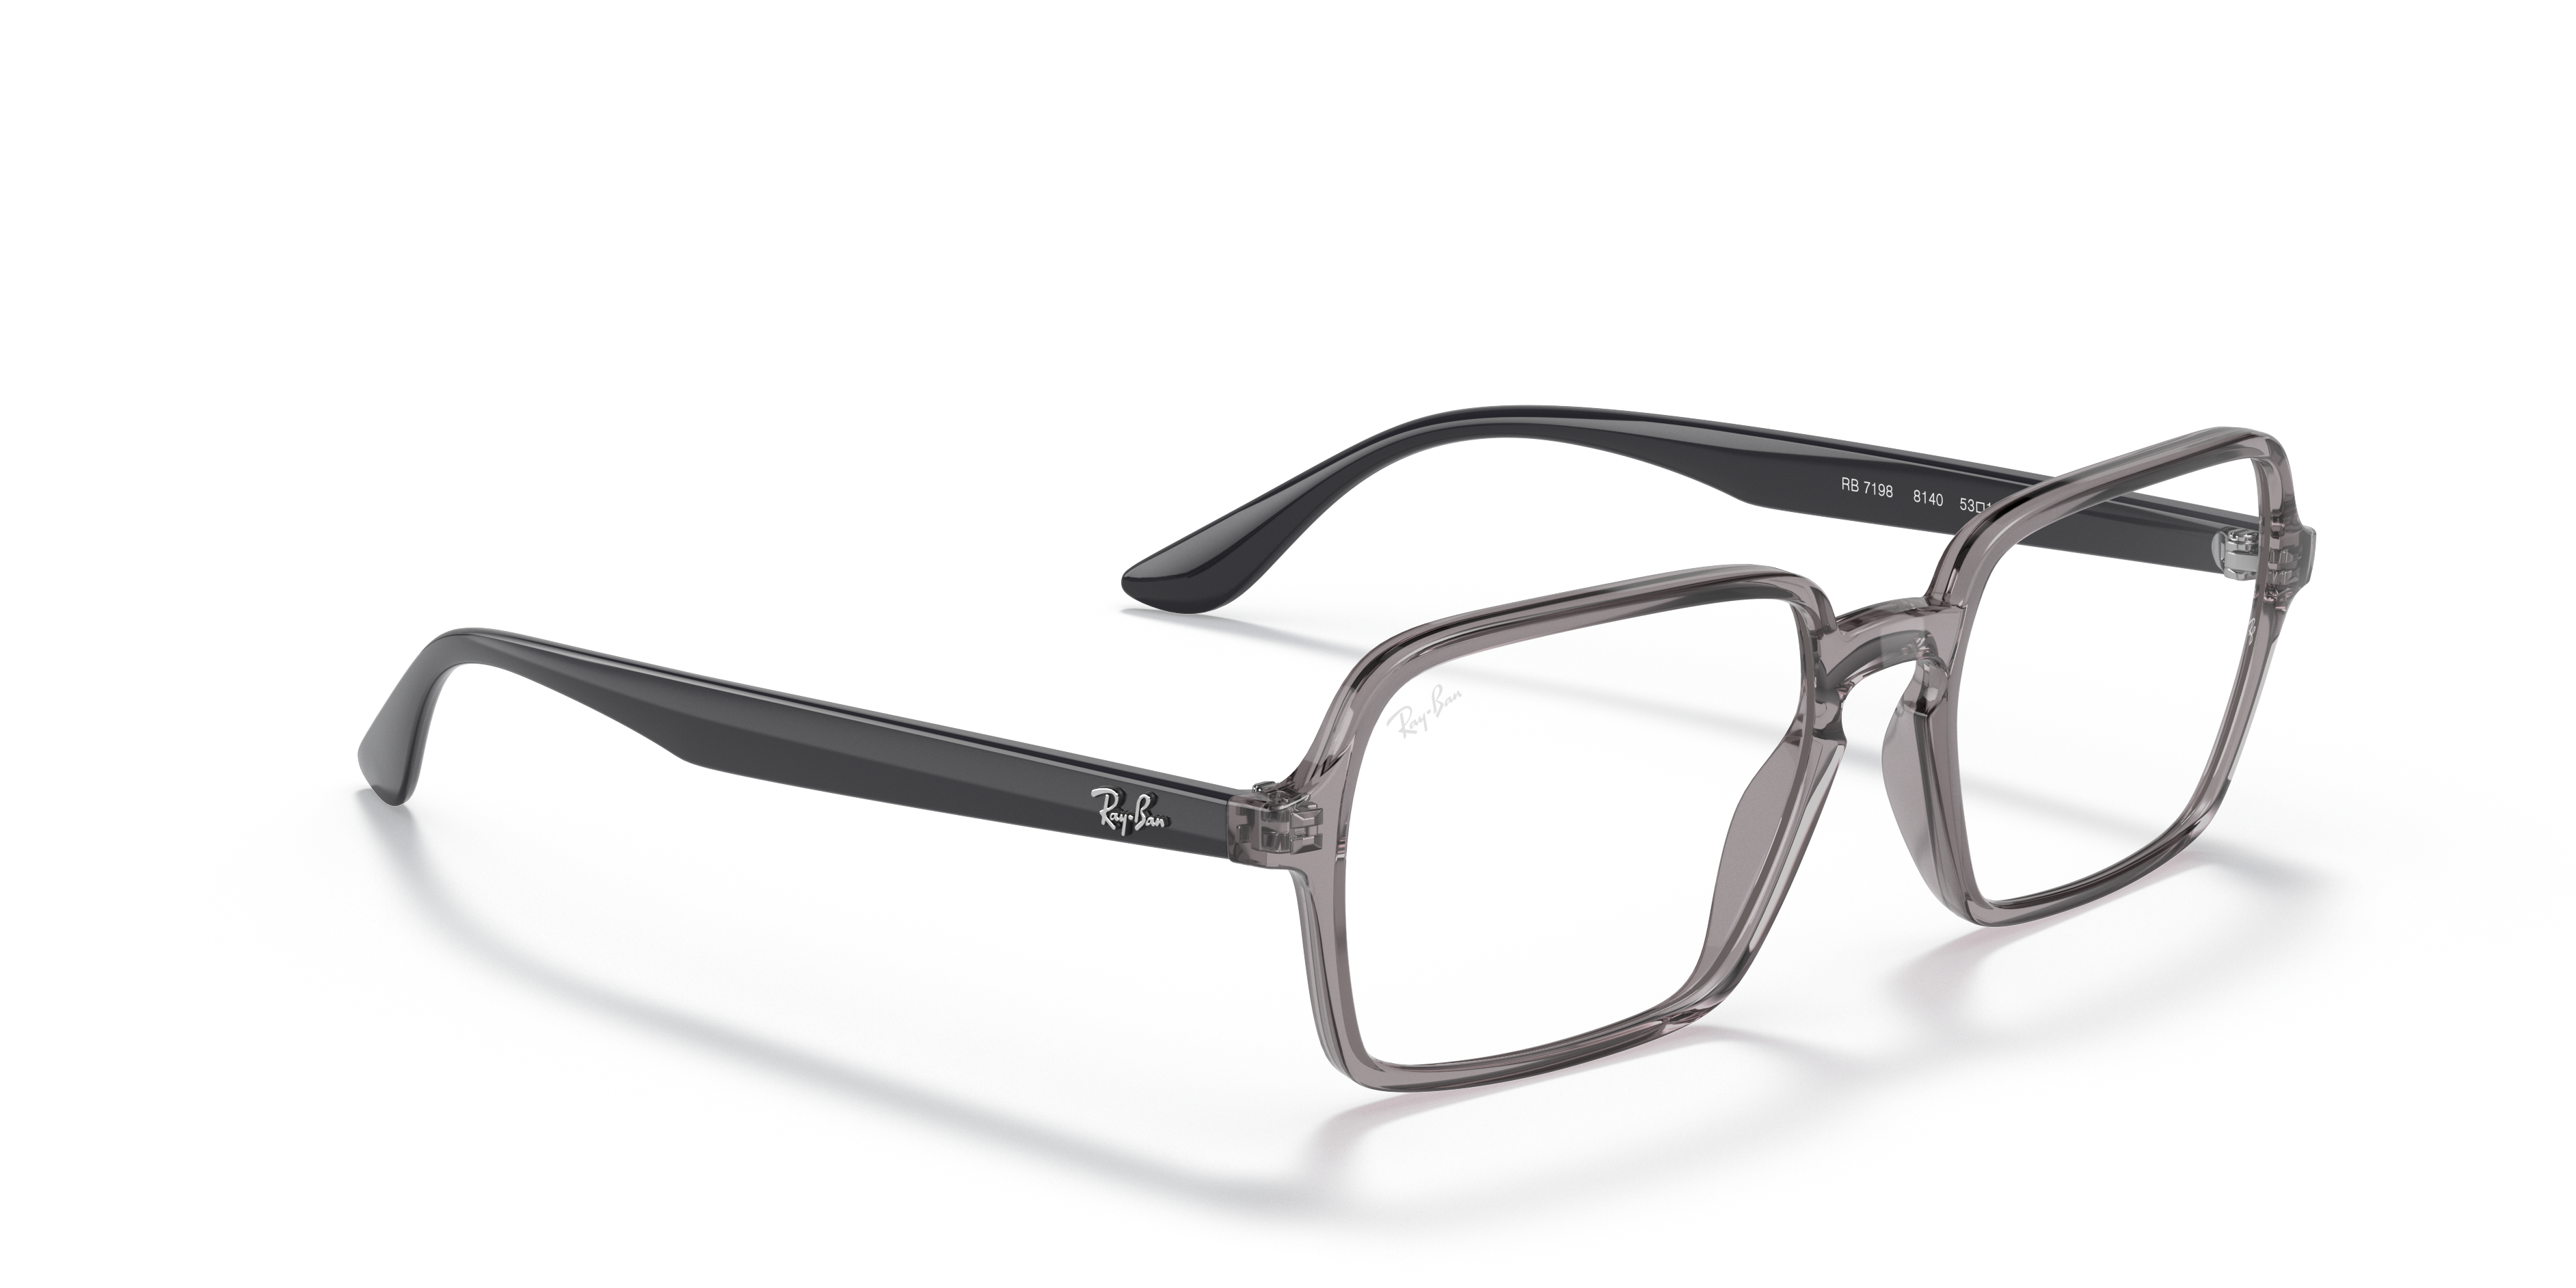 Rb7198 Eyeglasses with Transparent Grey Frame | Ray-Ban®